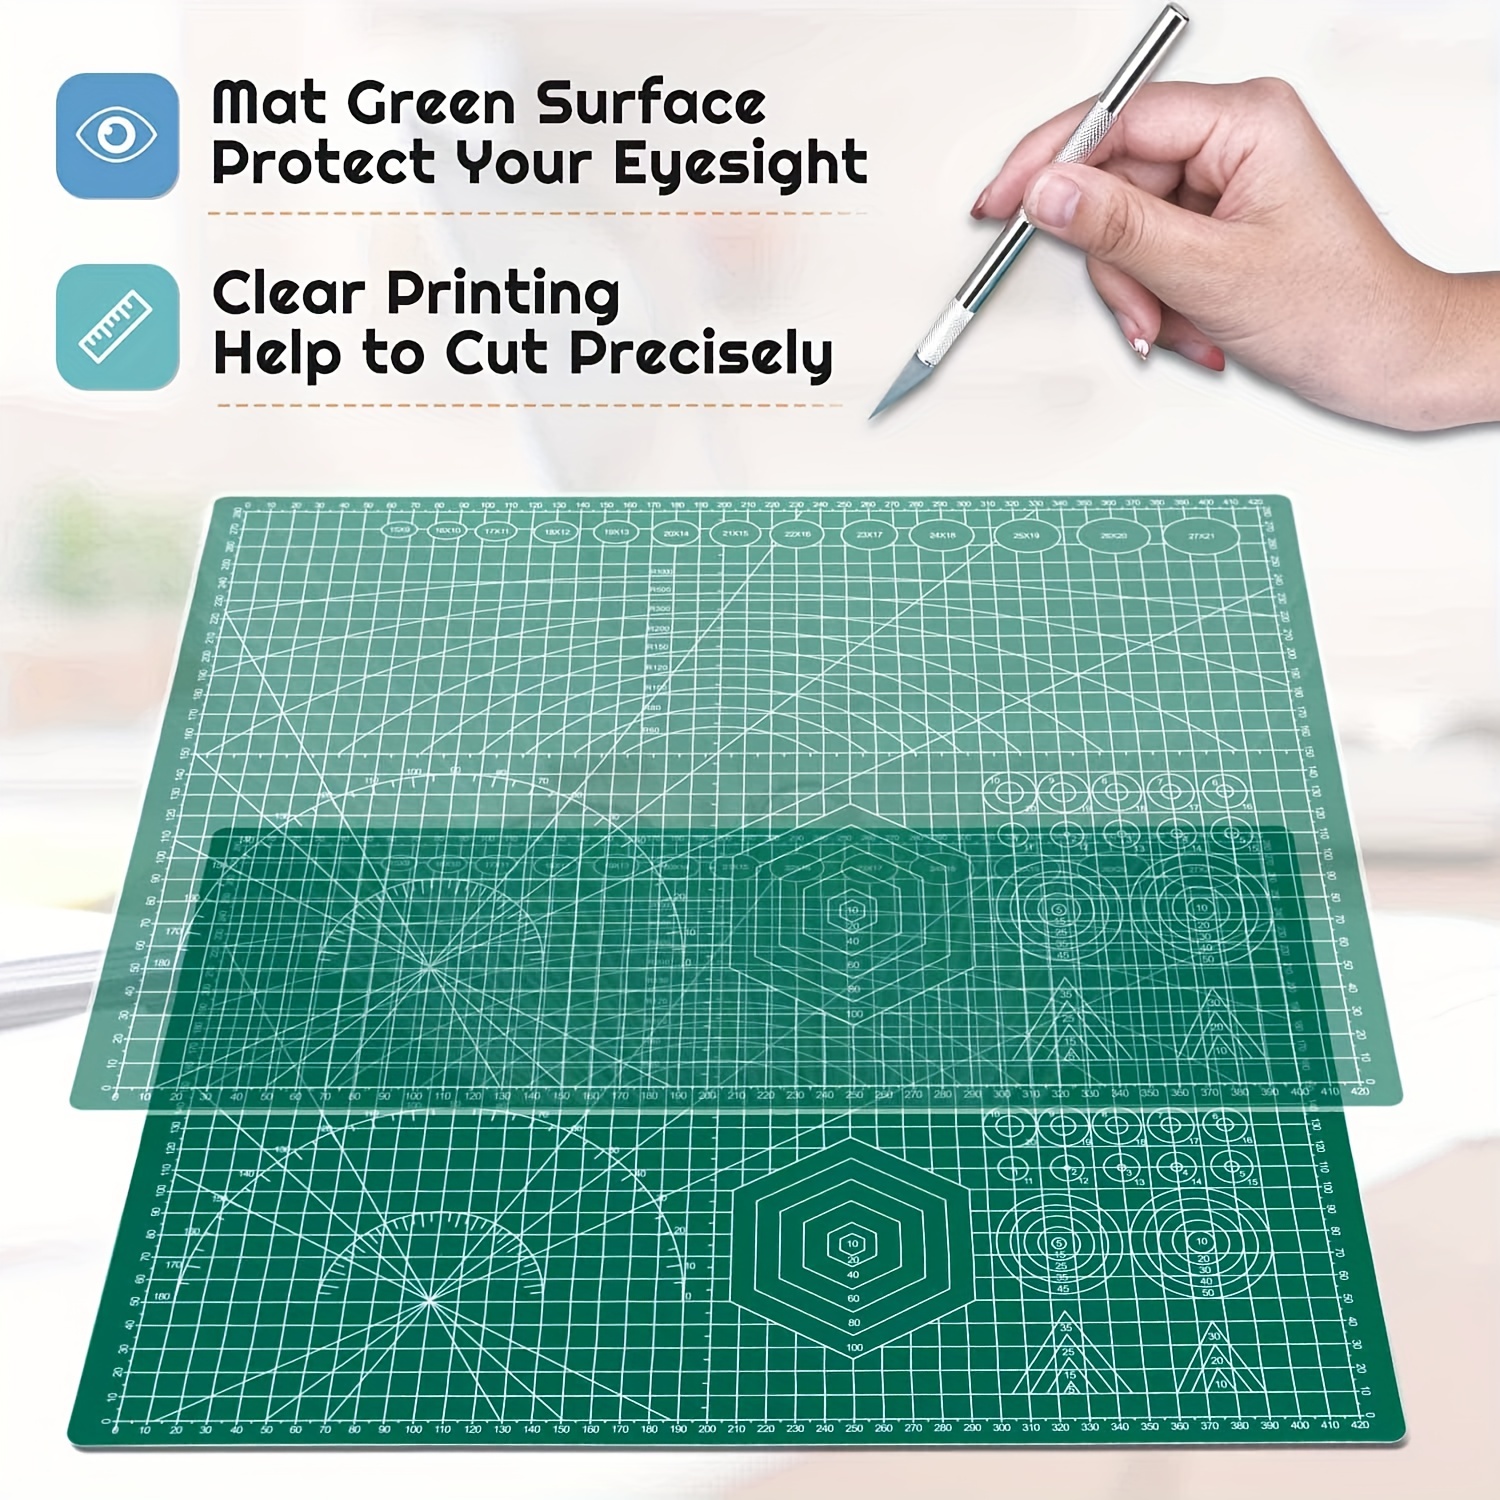 Self Healing PVC Cutting Mat,Sewing Mat,Double Sided,Craft Cutting Mat With  Accurate Guide Grid Lines Design For  Craft,Fabric,Quilting,Sewing,Scrapbooking Project,Green,A5/A4/A3